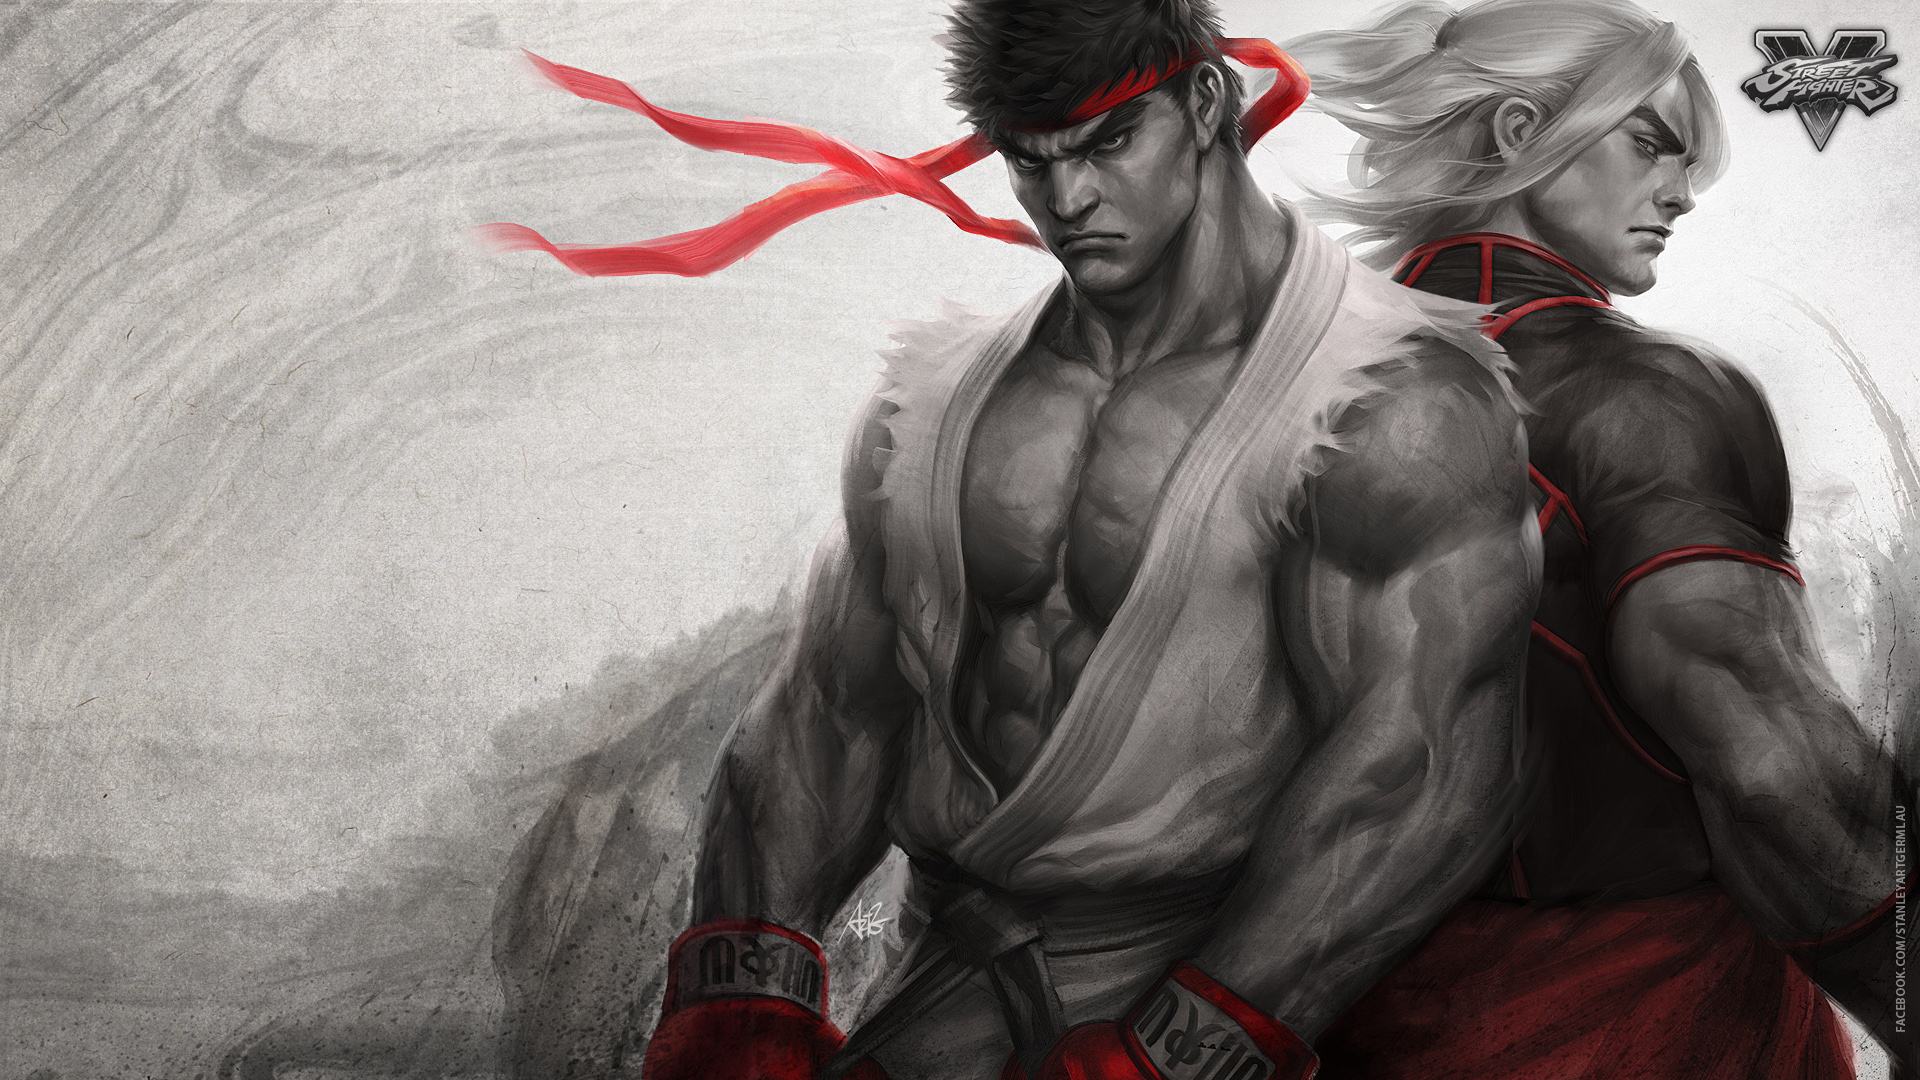 street fighter wallpaper,drawing,sketch,fictional character,illustration,muscle